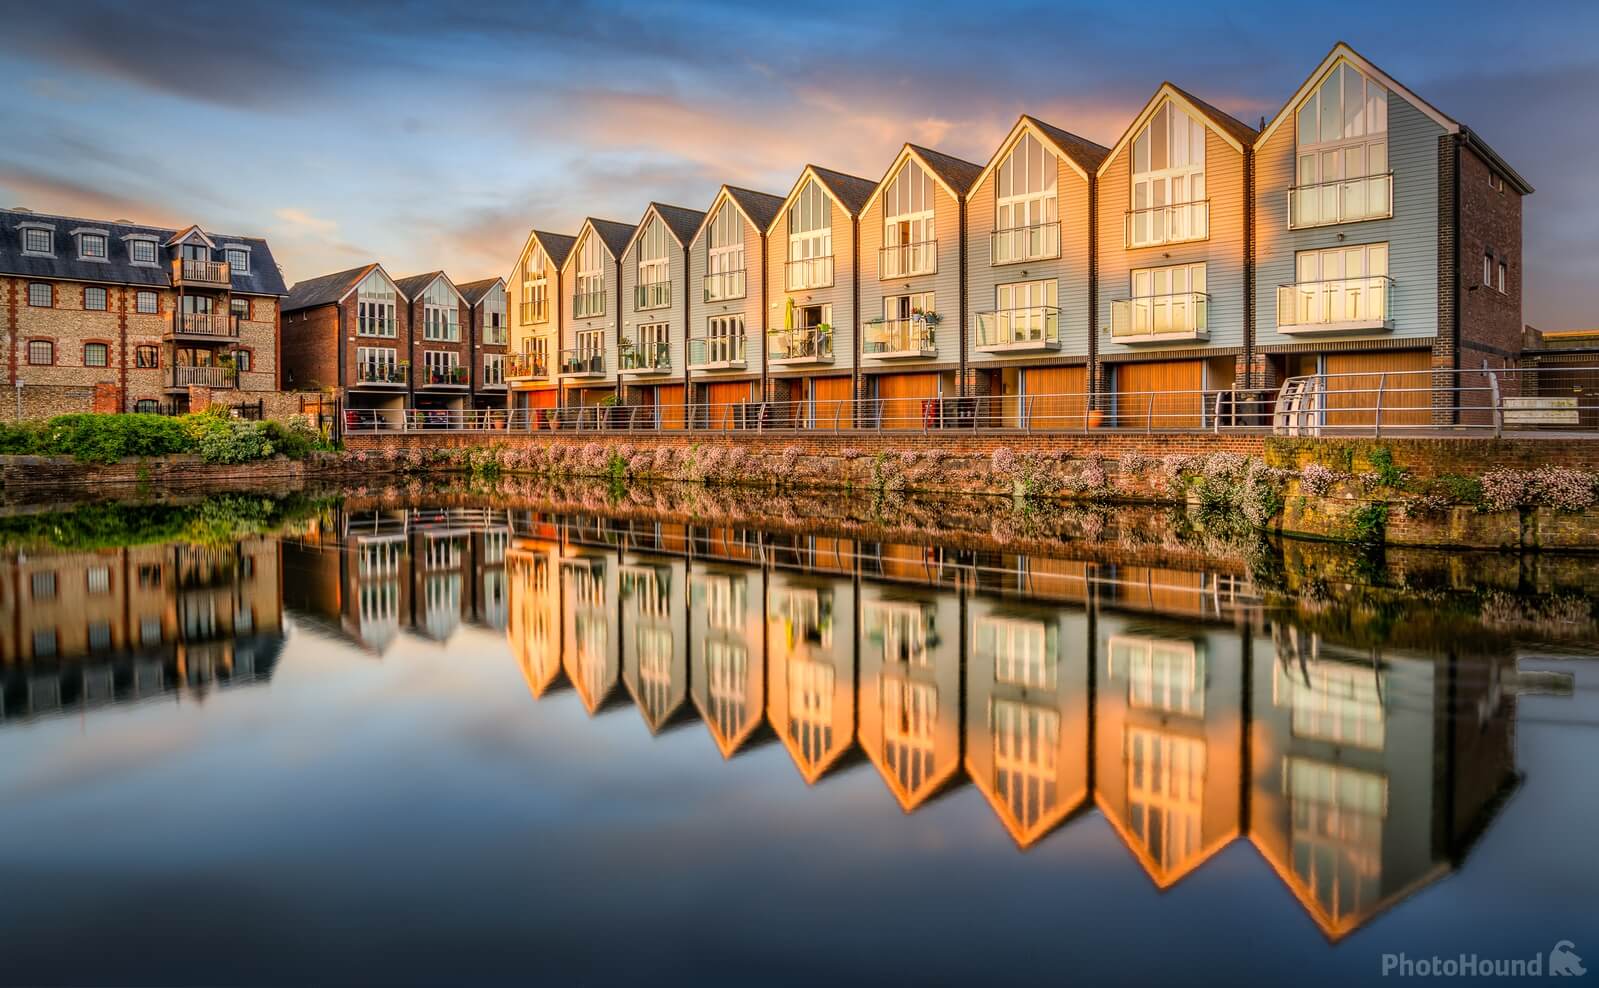 Image of Chichester Canal Basin by Jakub Bors